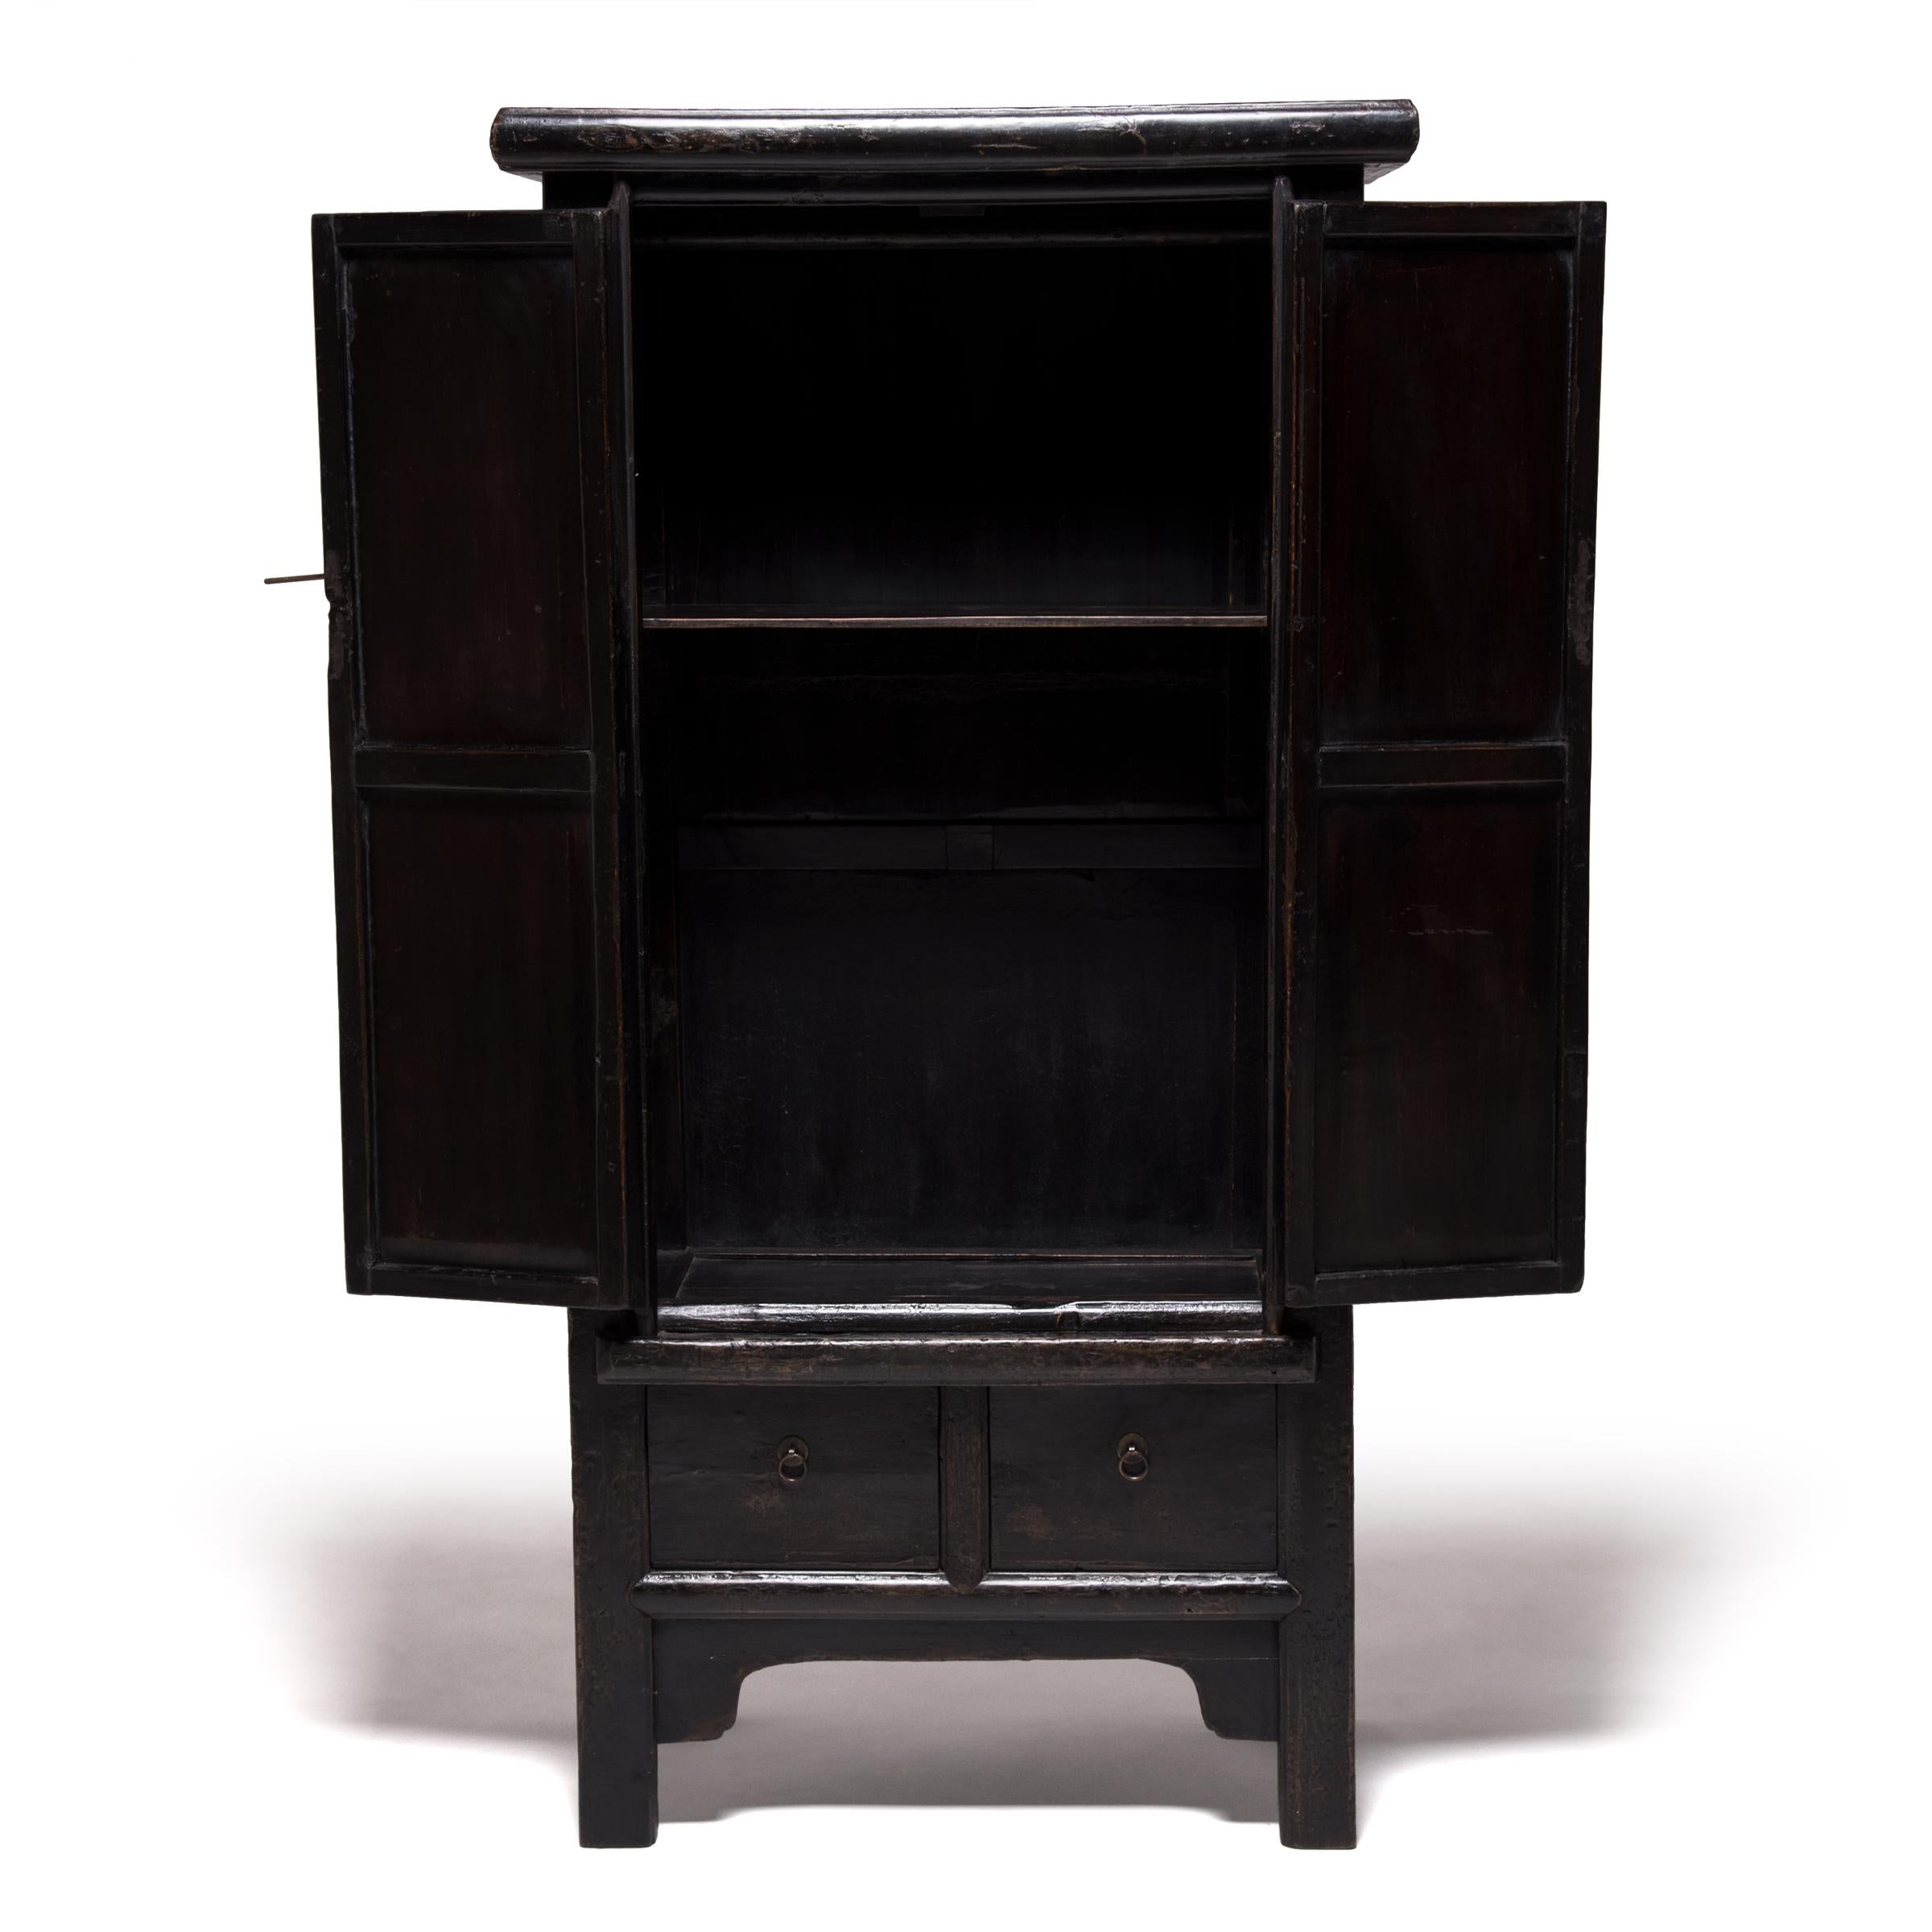 This mid-19th century two door cabinet from China's Hebei province is still coated in a lustrous black lacquer finish after nearly two centuries of use. A laborious process, lacquer must be applied slowly, brushed on in long fluid motions. A